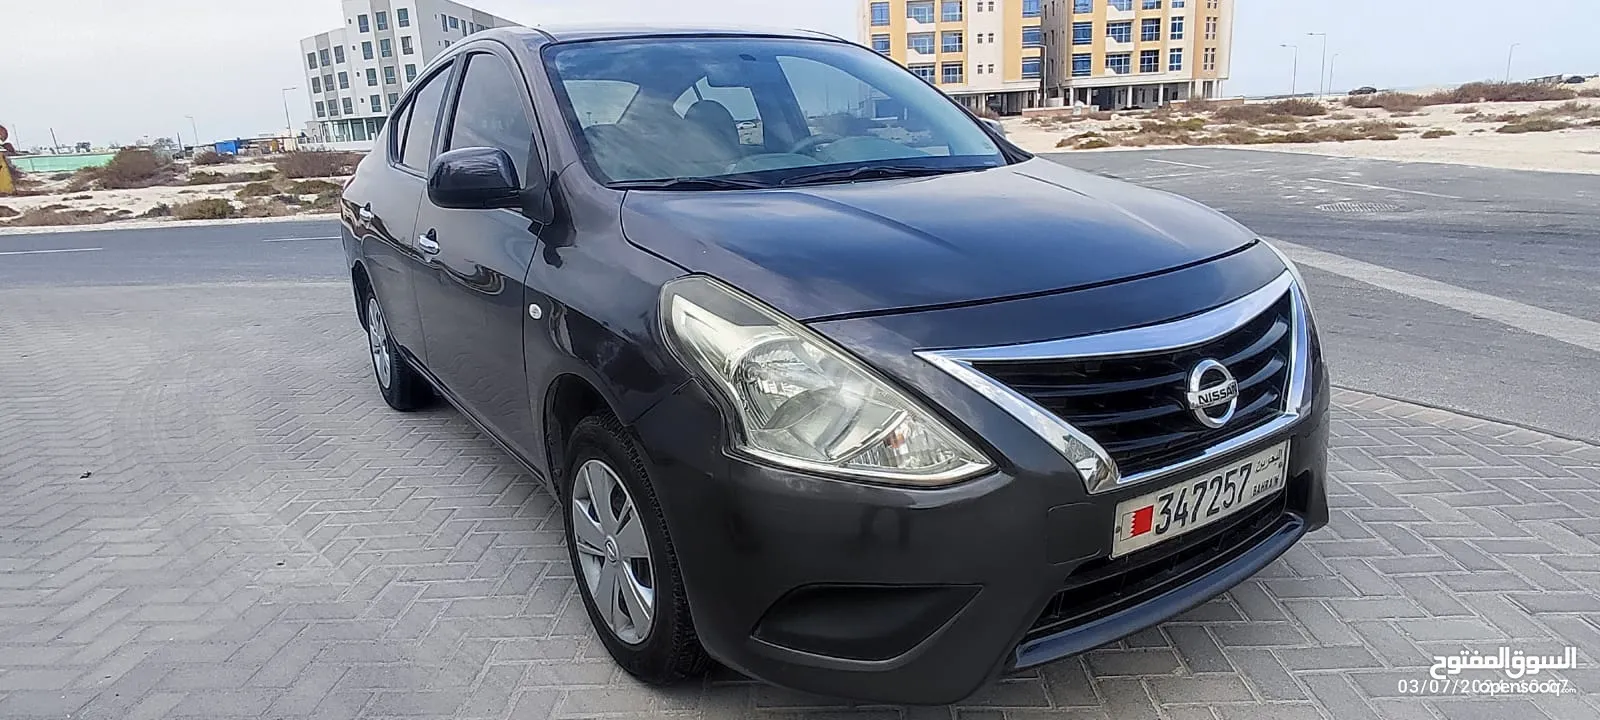 Nissan sunny model 2019 for sale good condition